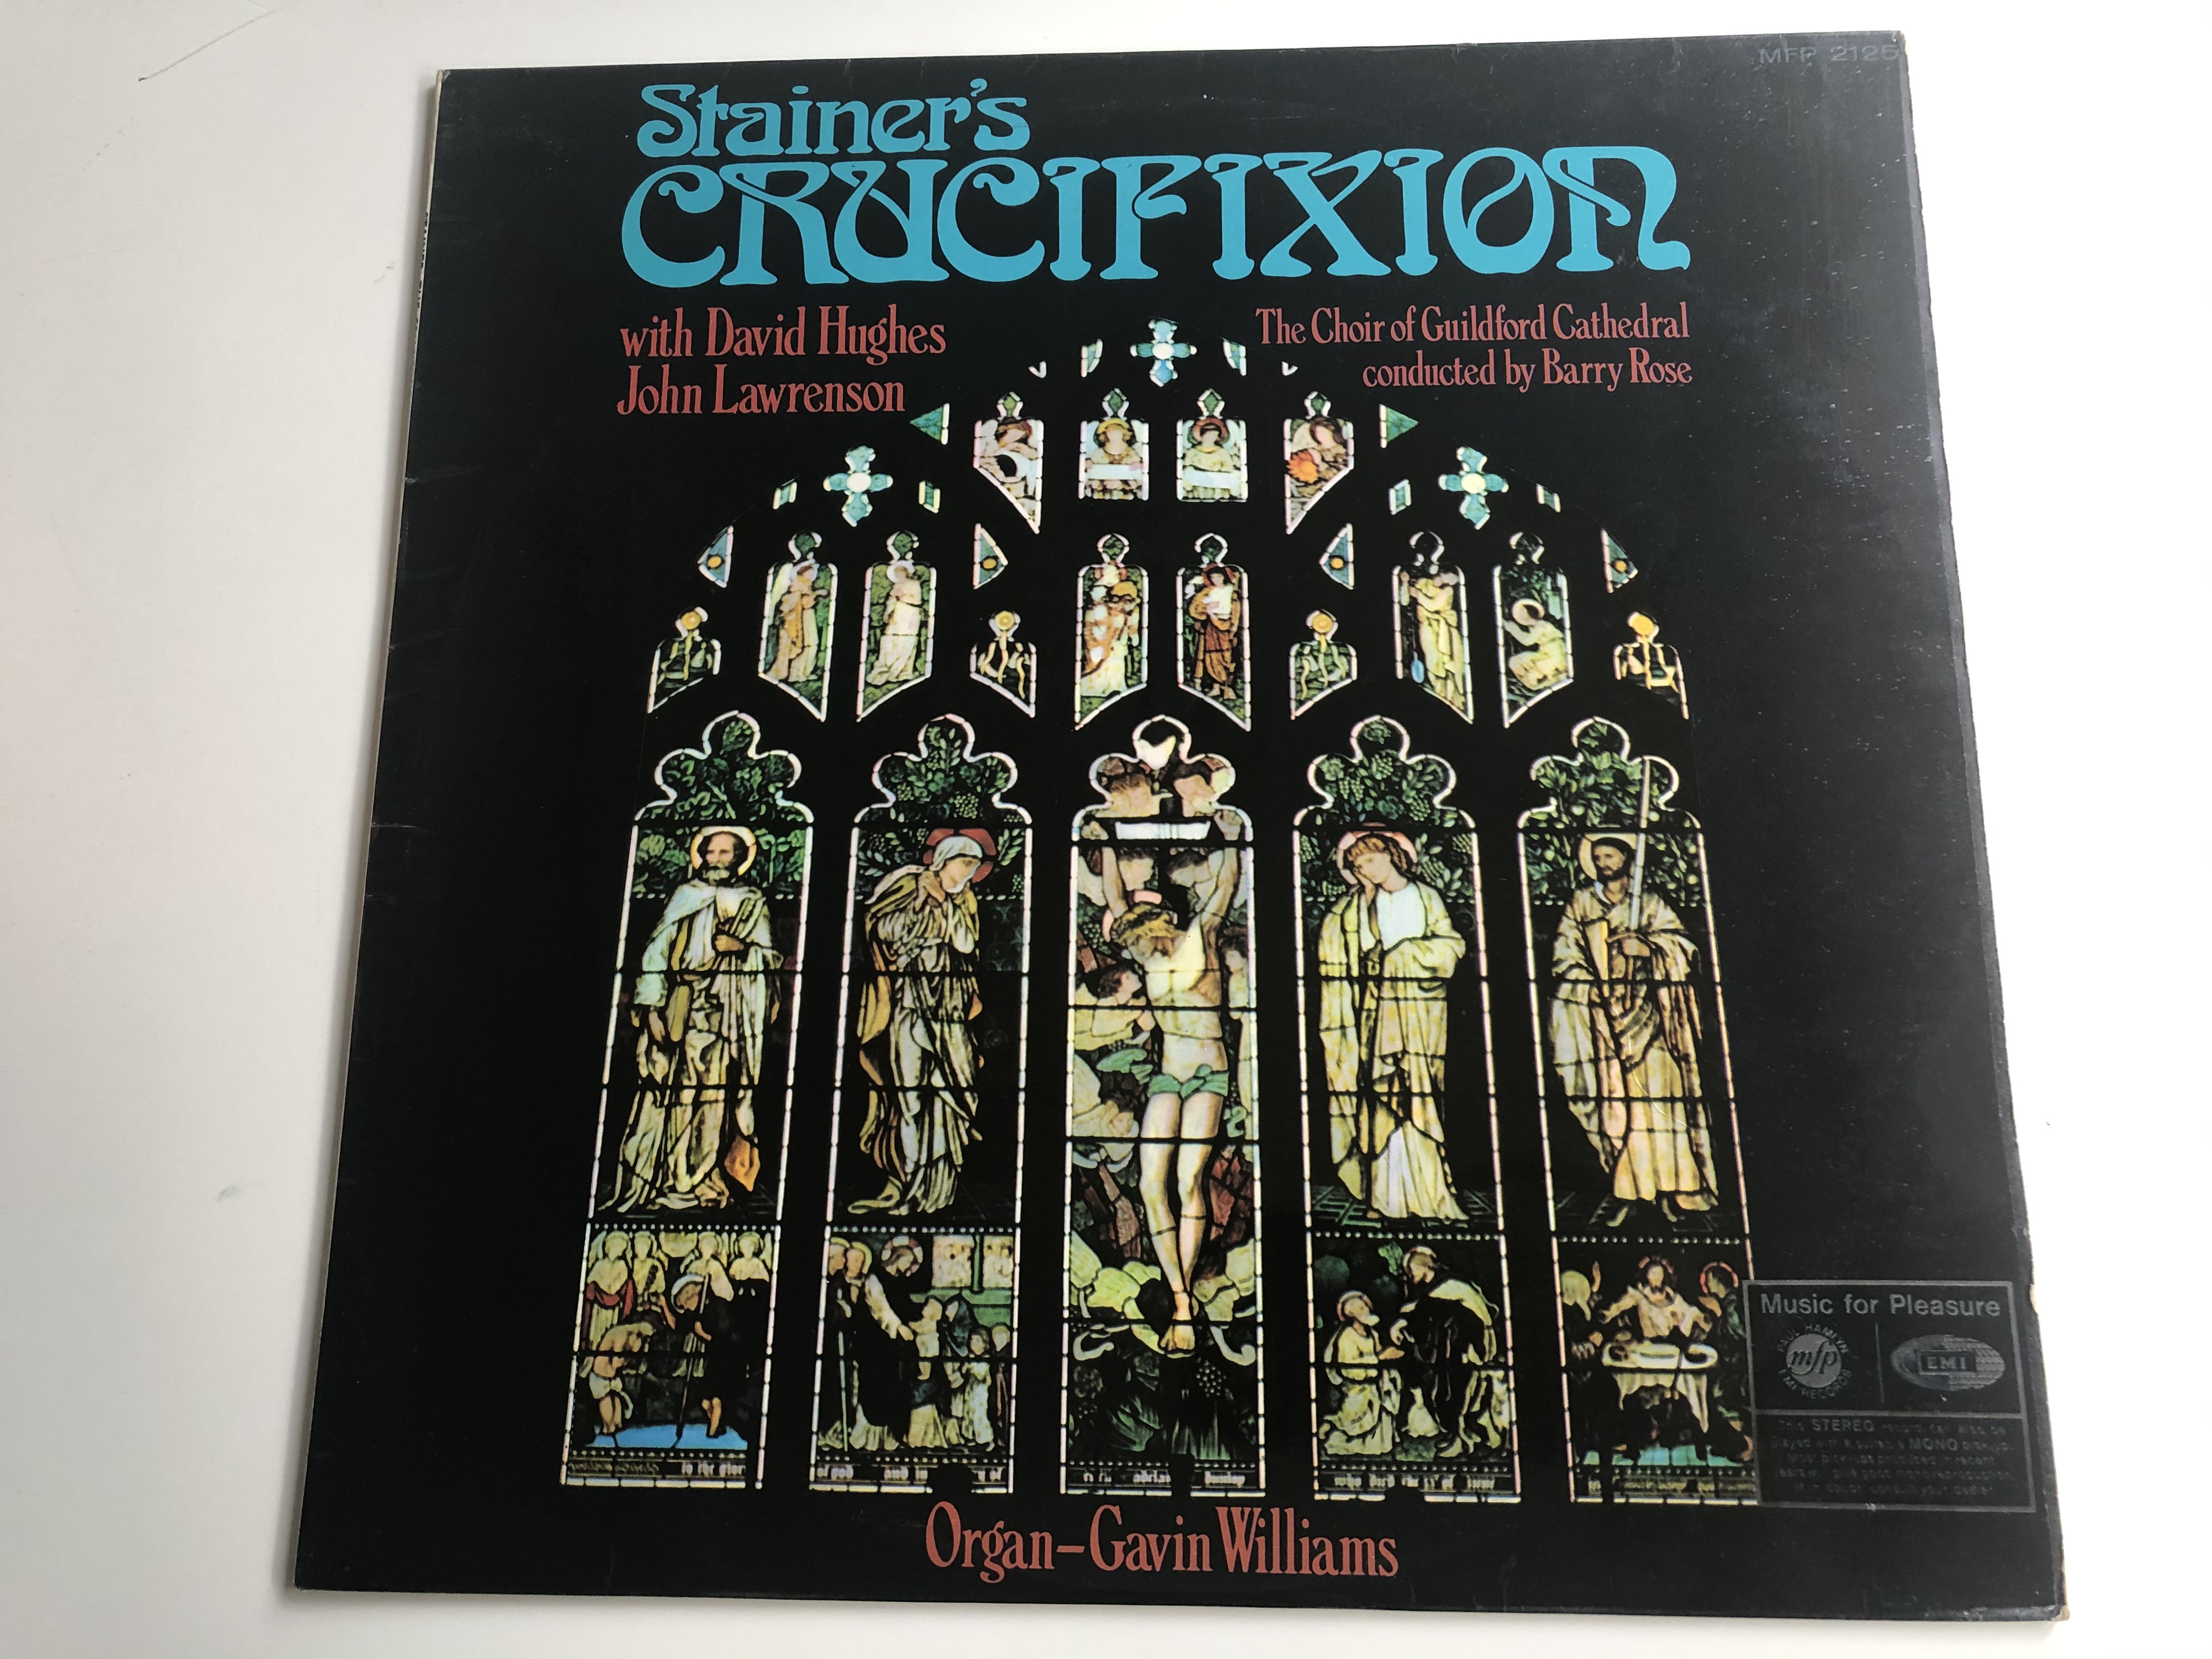 stainer-crucifixion-with-david-hughes-john-lawrenson-the-choir-of-guildford-cathedral-conducted-by-barry-rose-organ-gavin-williams-music-for-pleasure-lp-1969-mfp-2125-1-.jpg